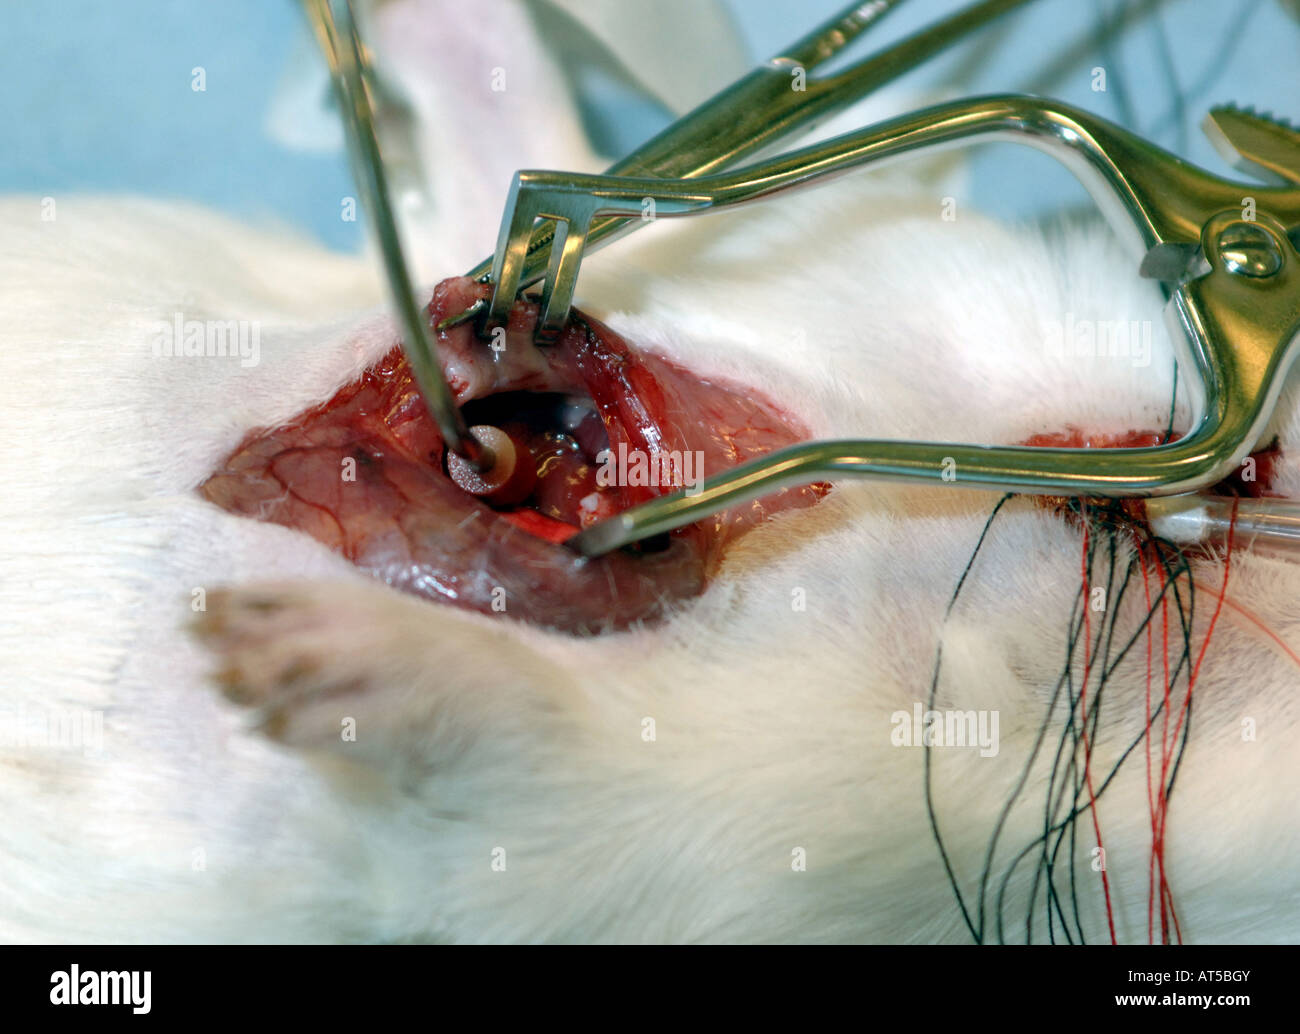 VIVISECTION MEDICAL  EXPERIMENT ON A RAT'S HEART Stock Photo